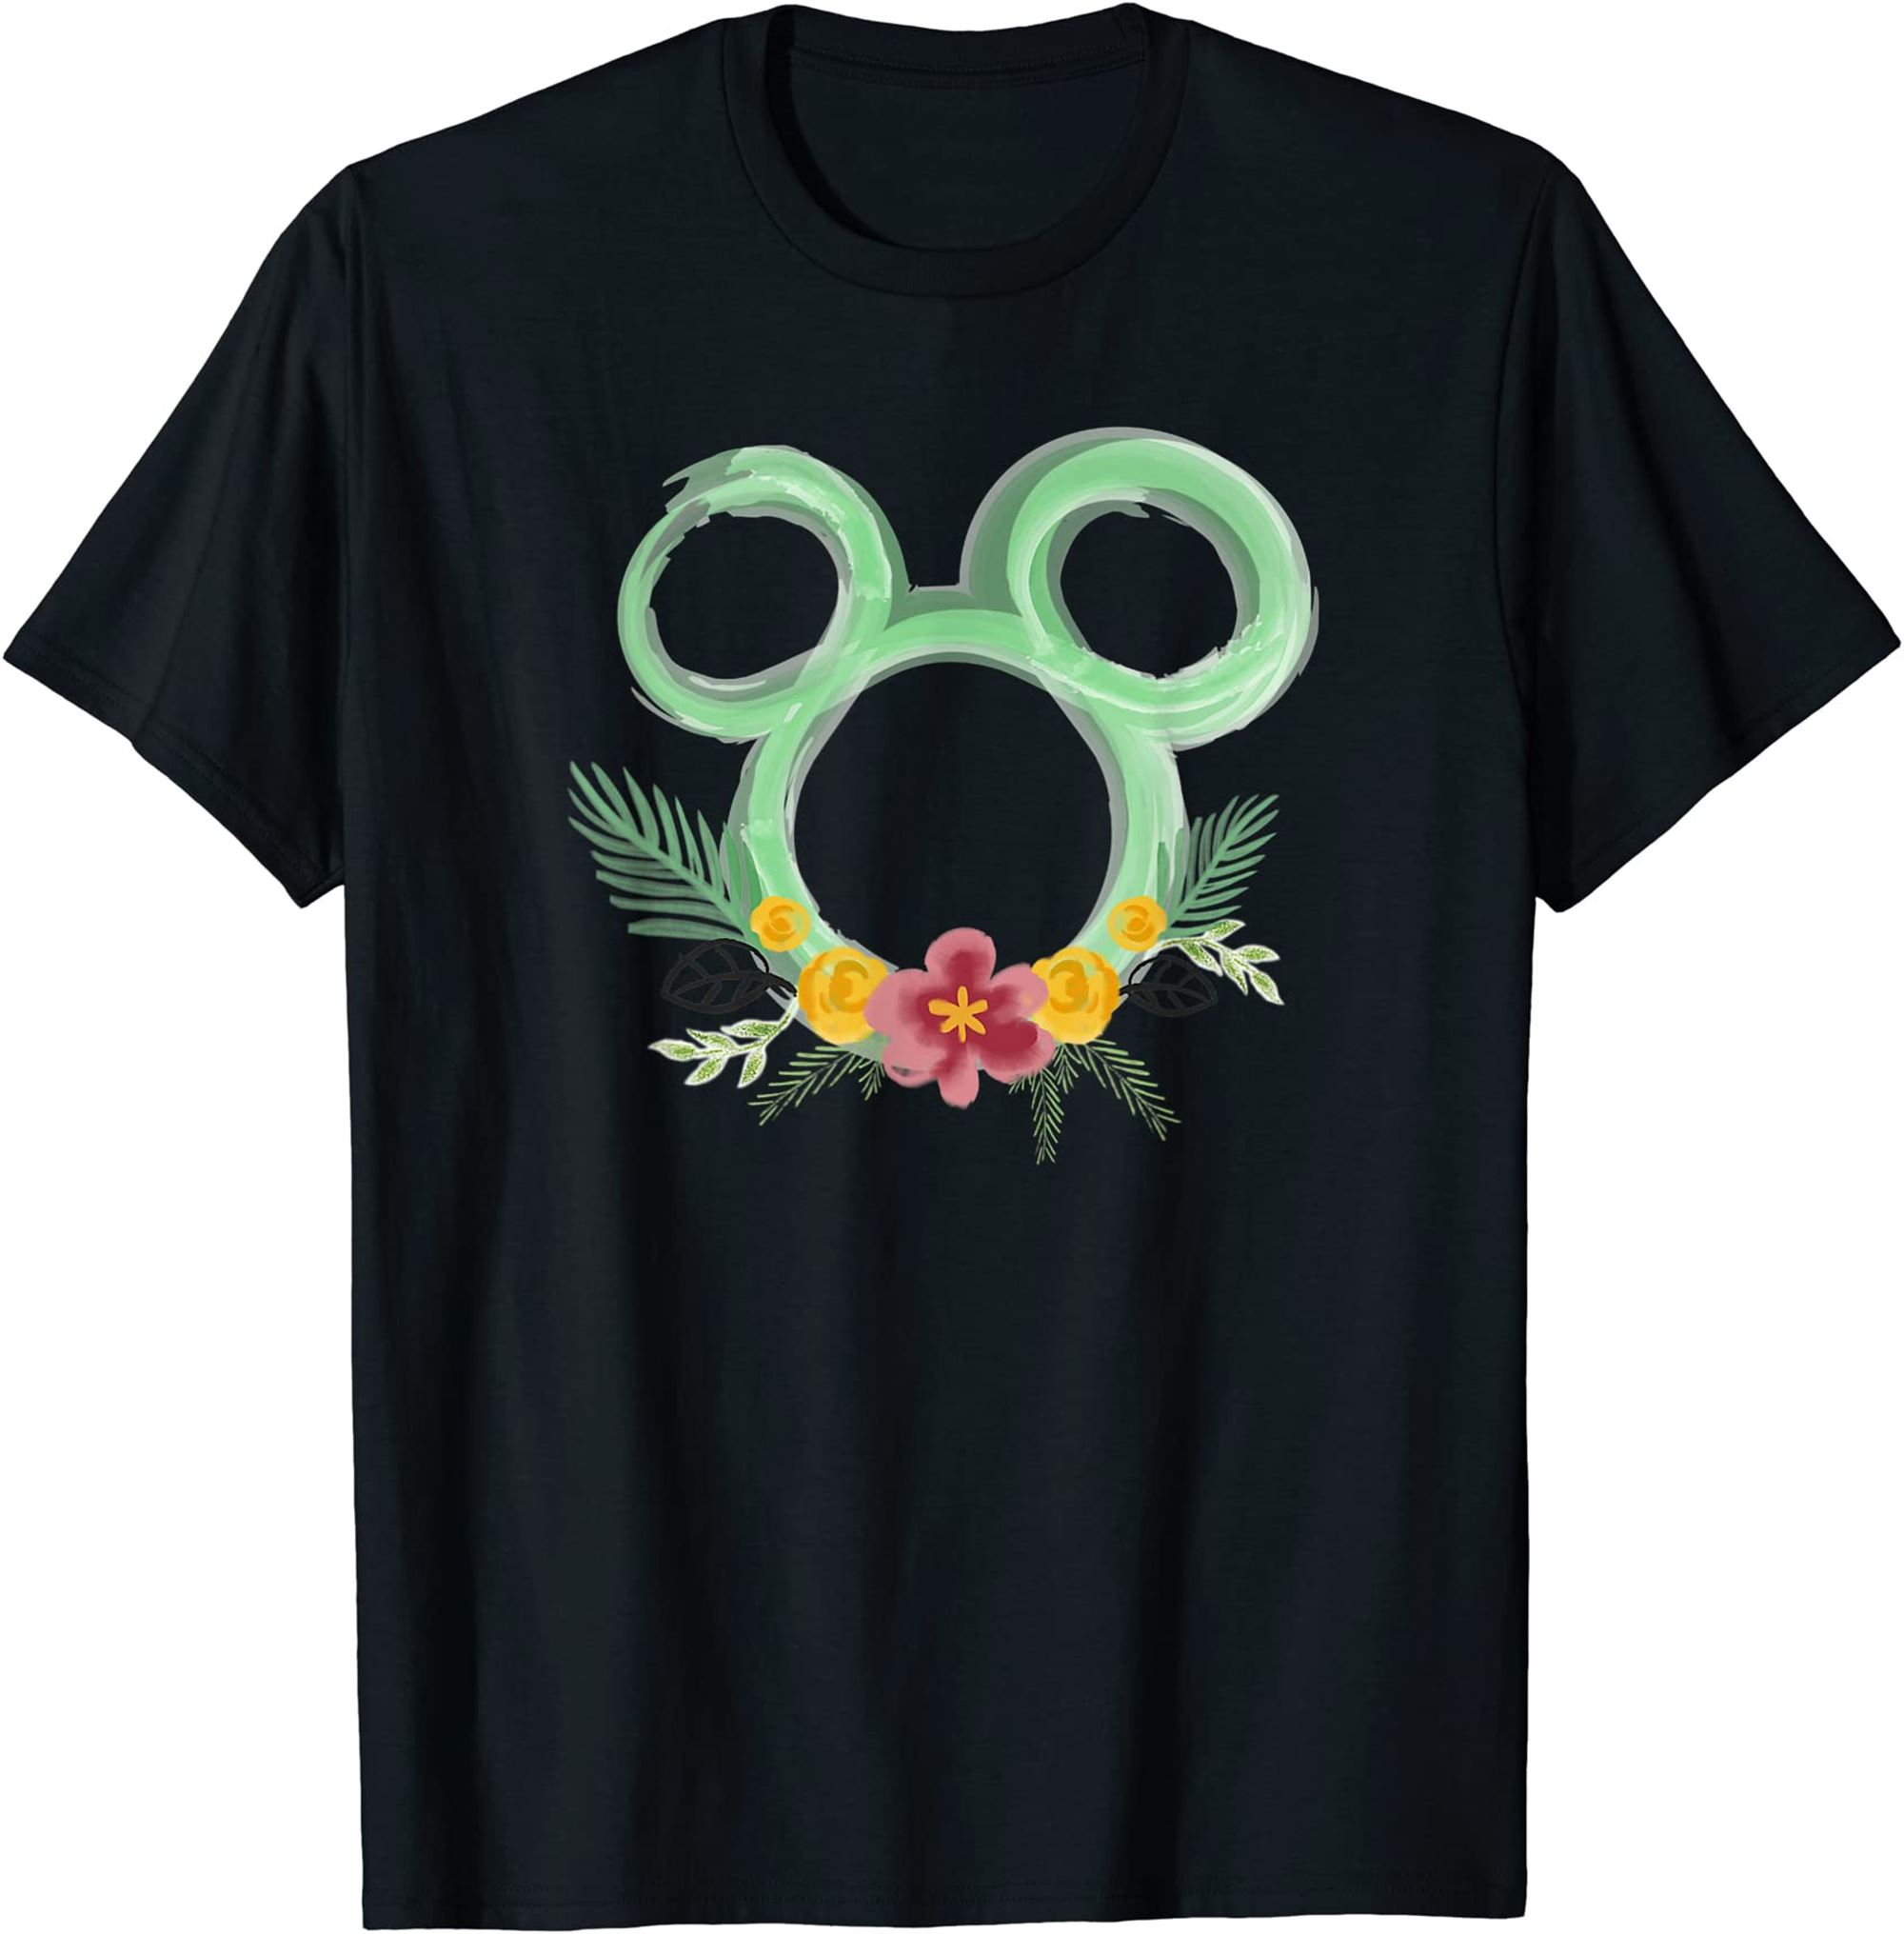 Disney Mickey And Friends Green Decals T-shirt Size Up To 5xl